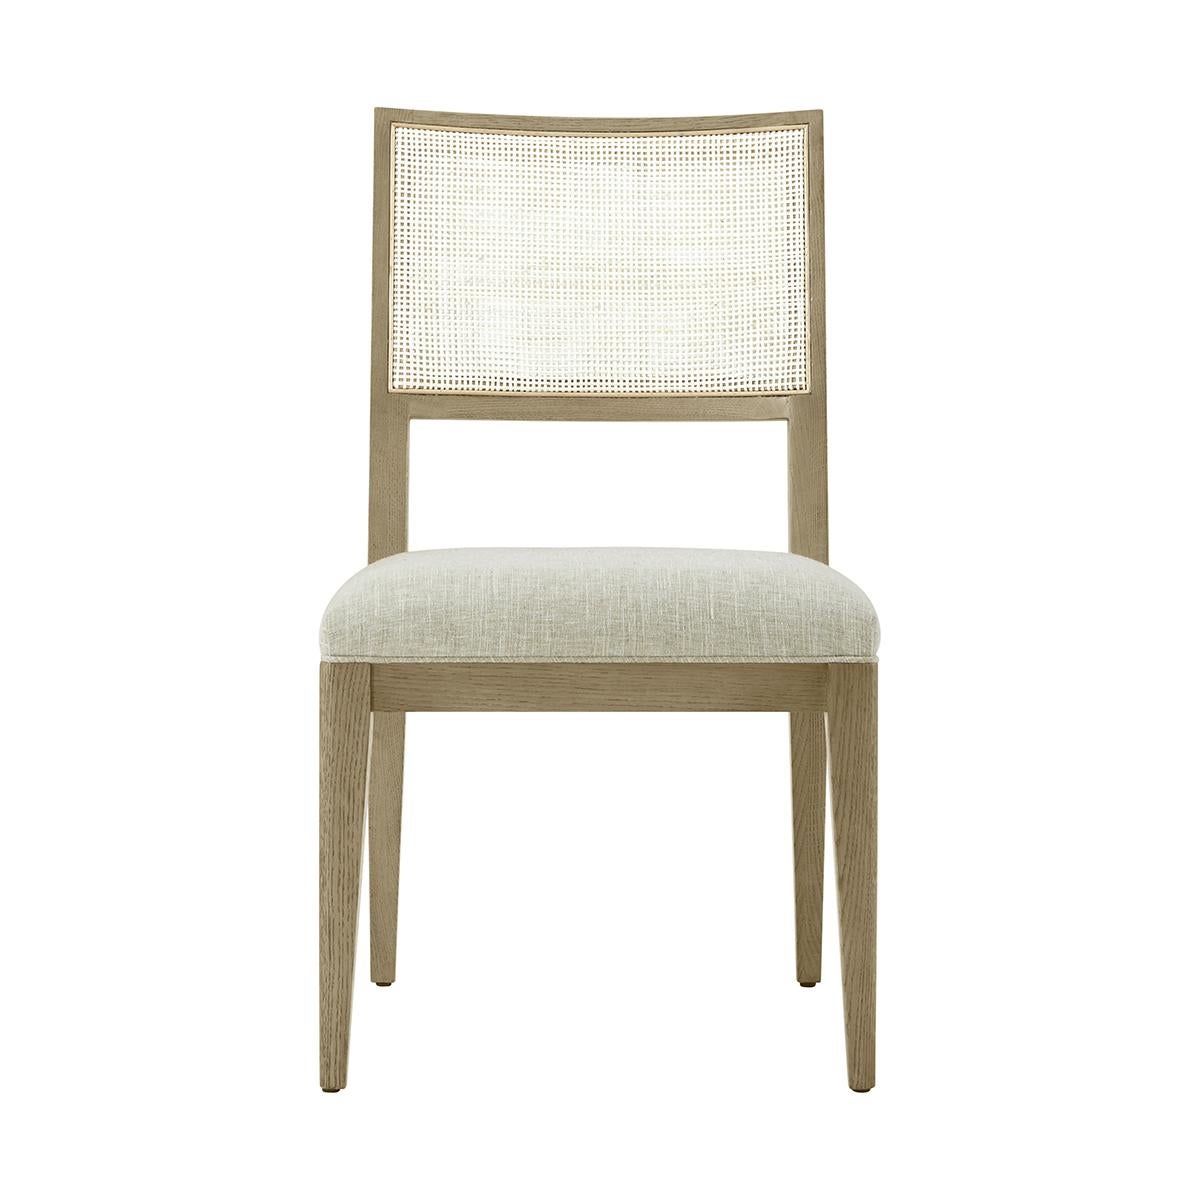 Dining Side Chair, a solid frame in our light dune finish, with a curved and caned backrest, a padded and upholstered seat cushions raised on tapered legs.

Dimensions: 20